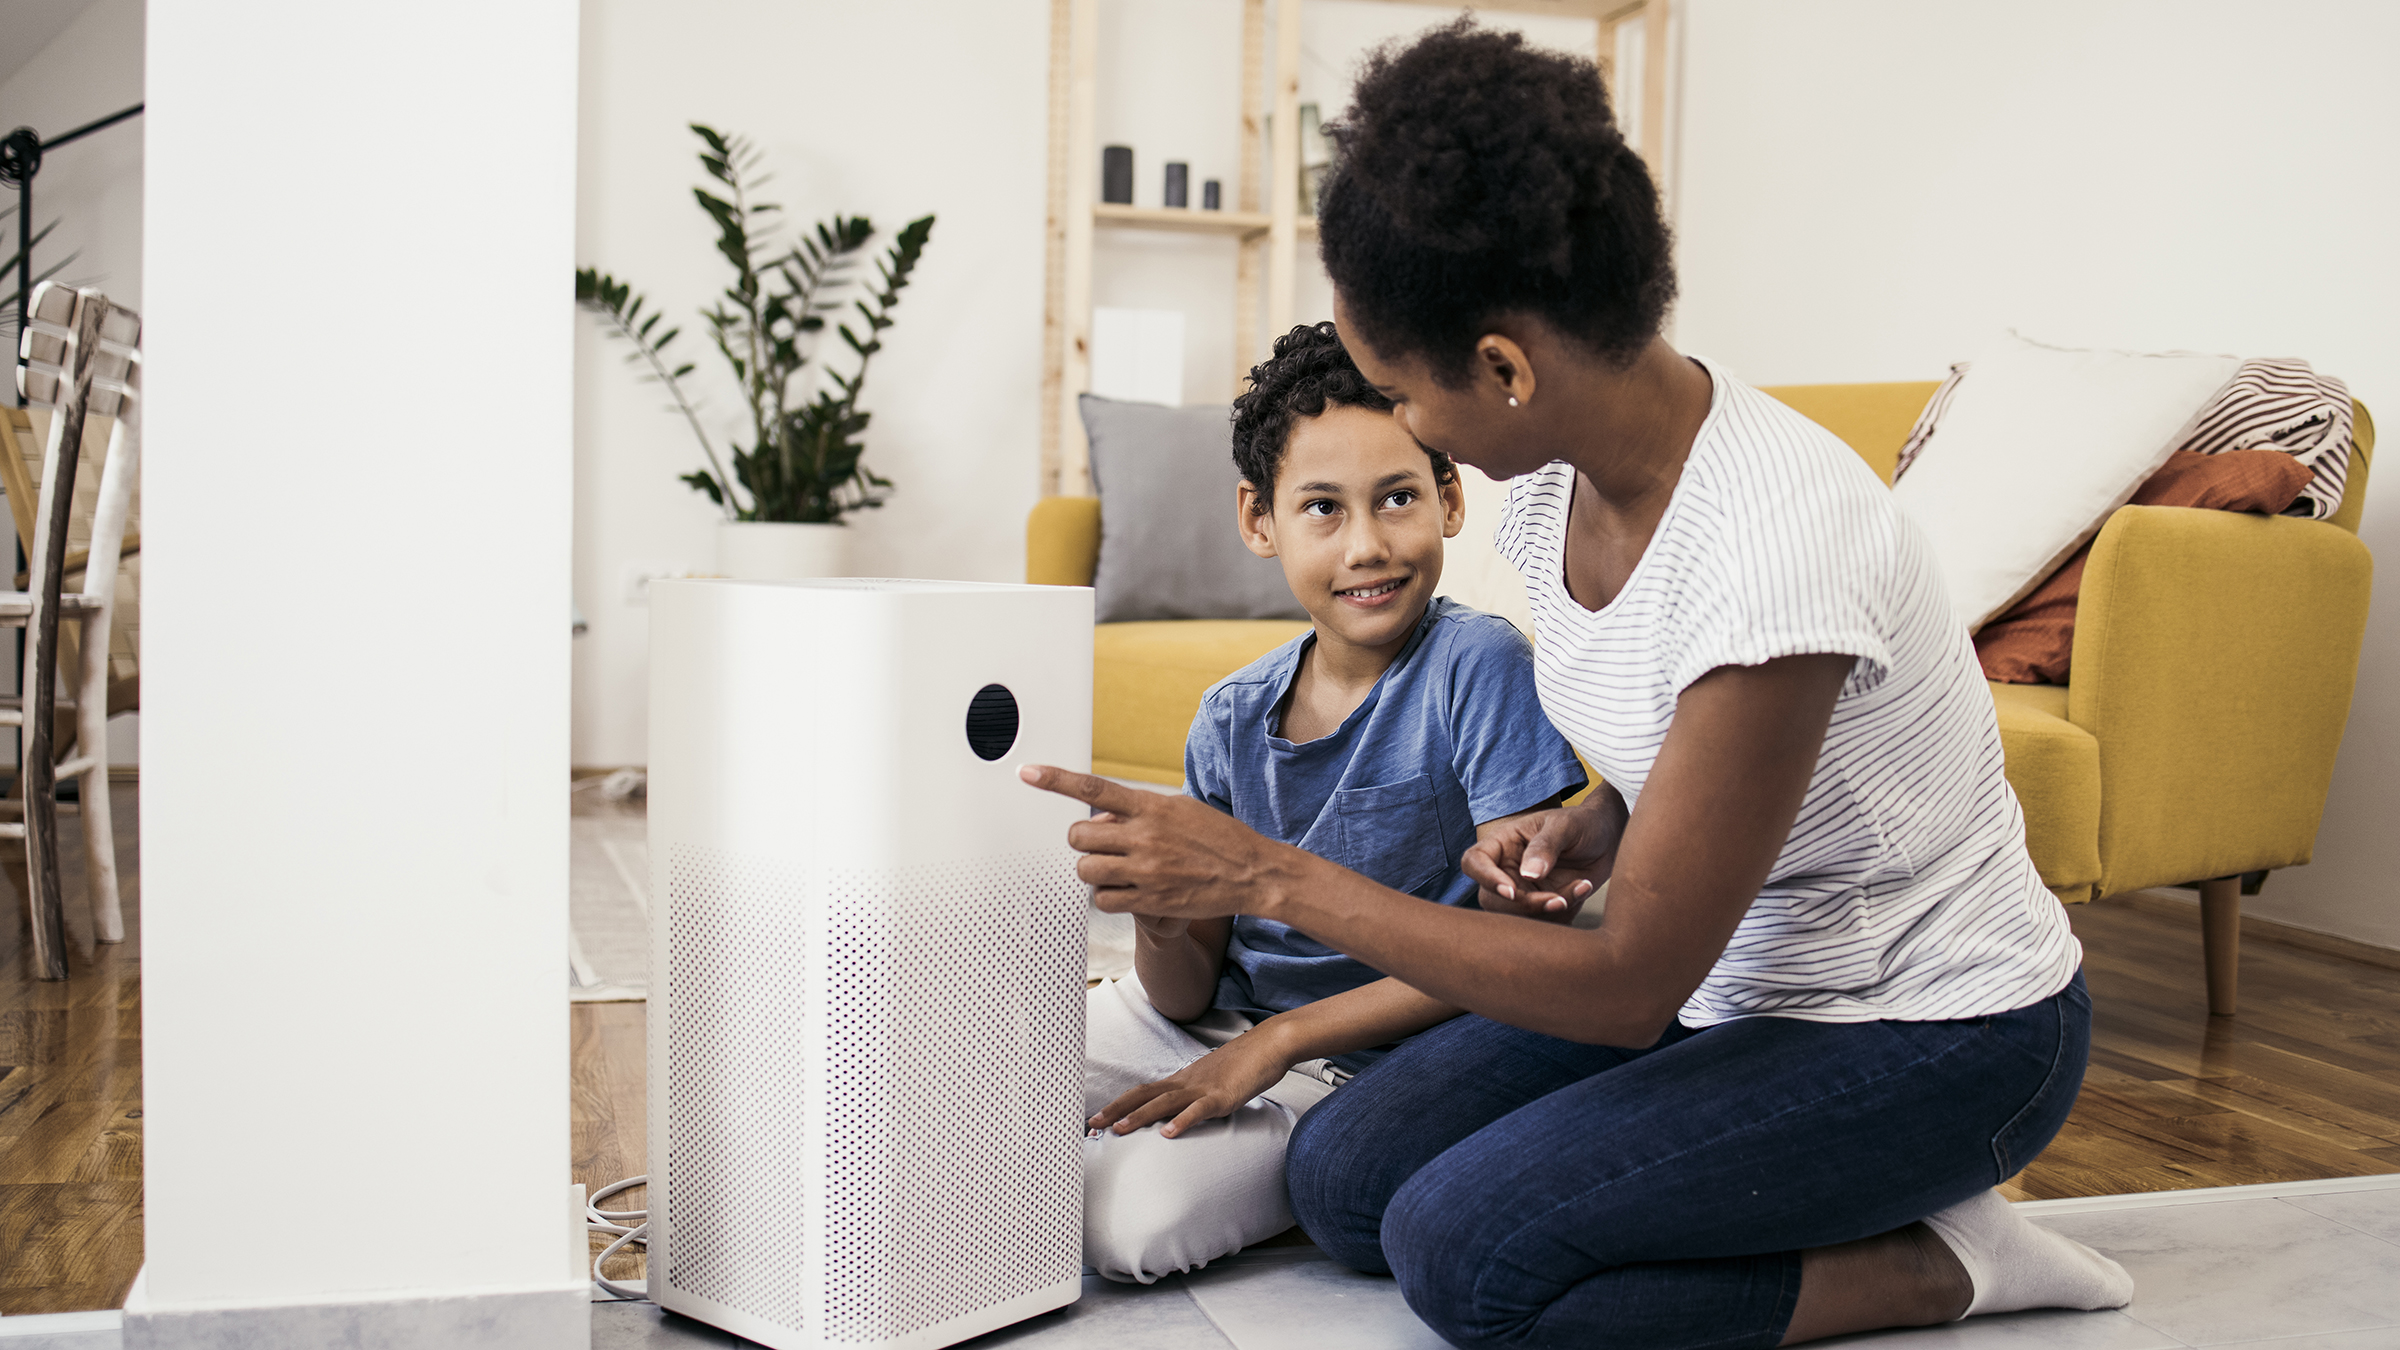 The Xiaomi Air Purifier 2S: A Good Entry-Level Option?